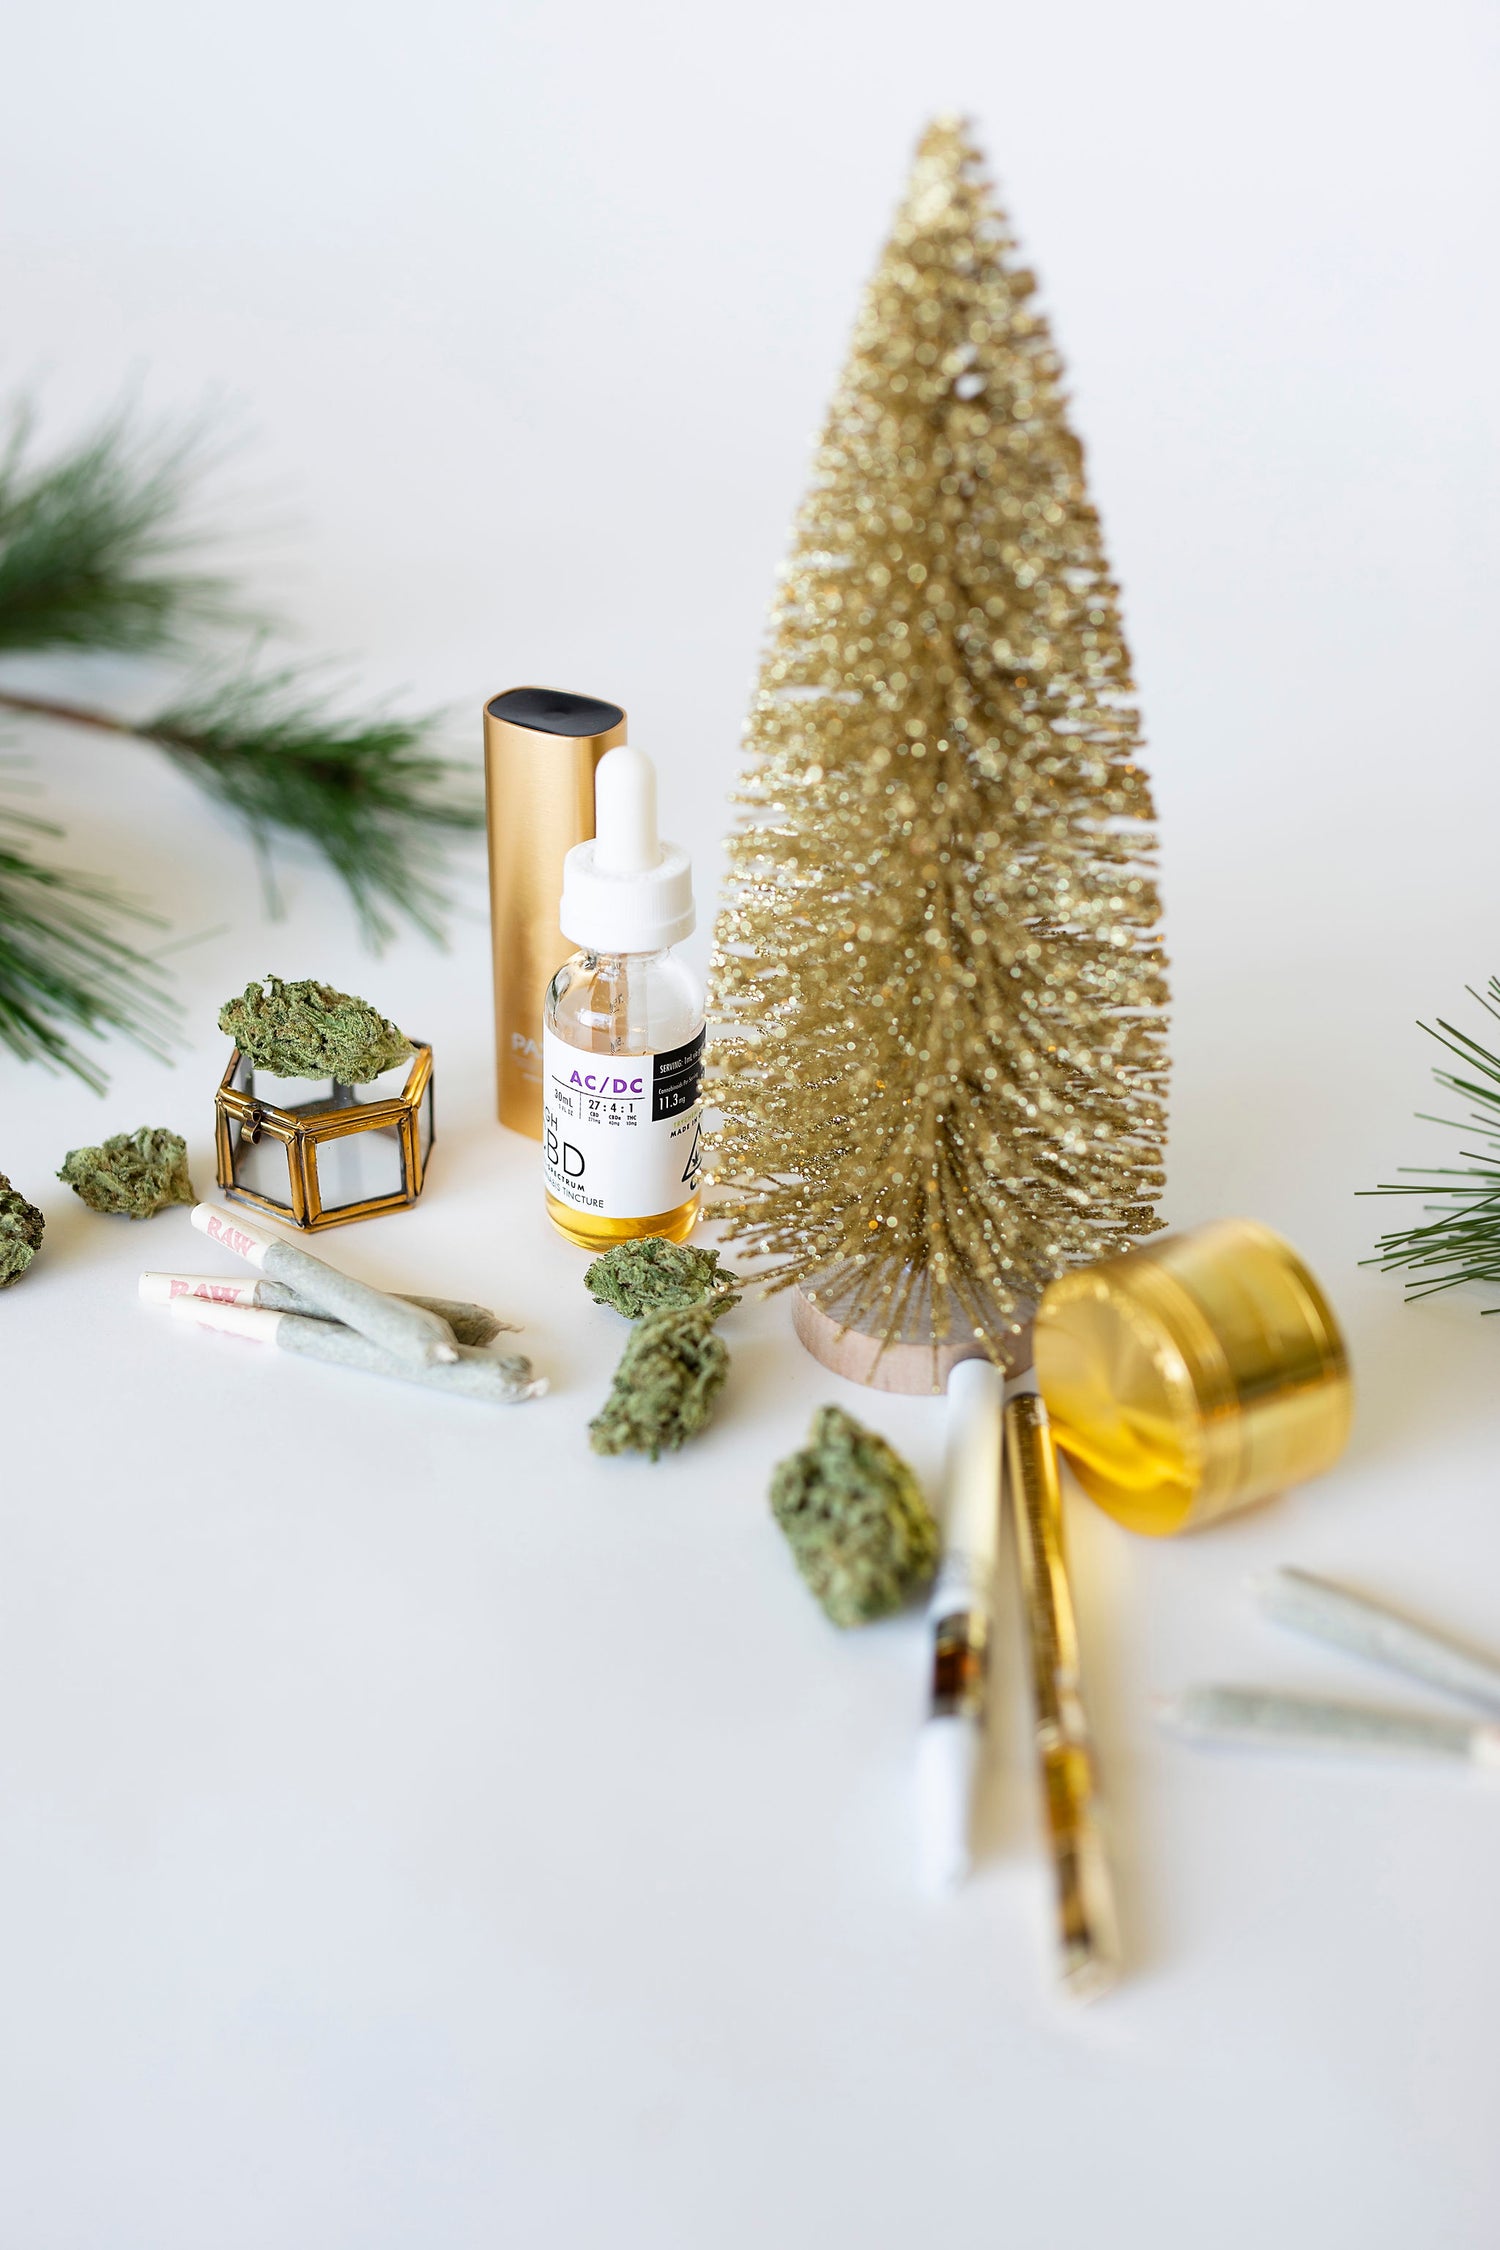 12 Days of Cannabis Gifting: Day 3 For your Pilates instructor